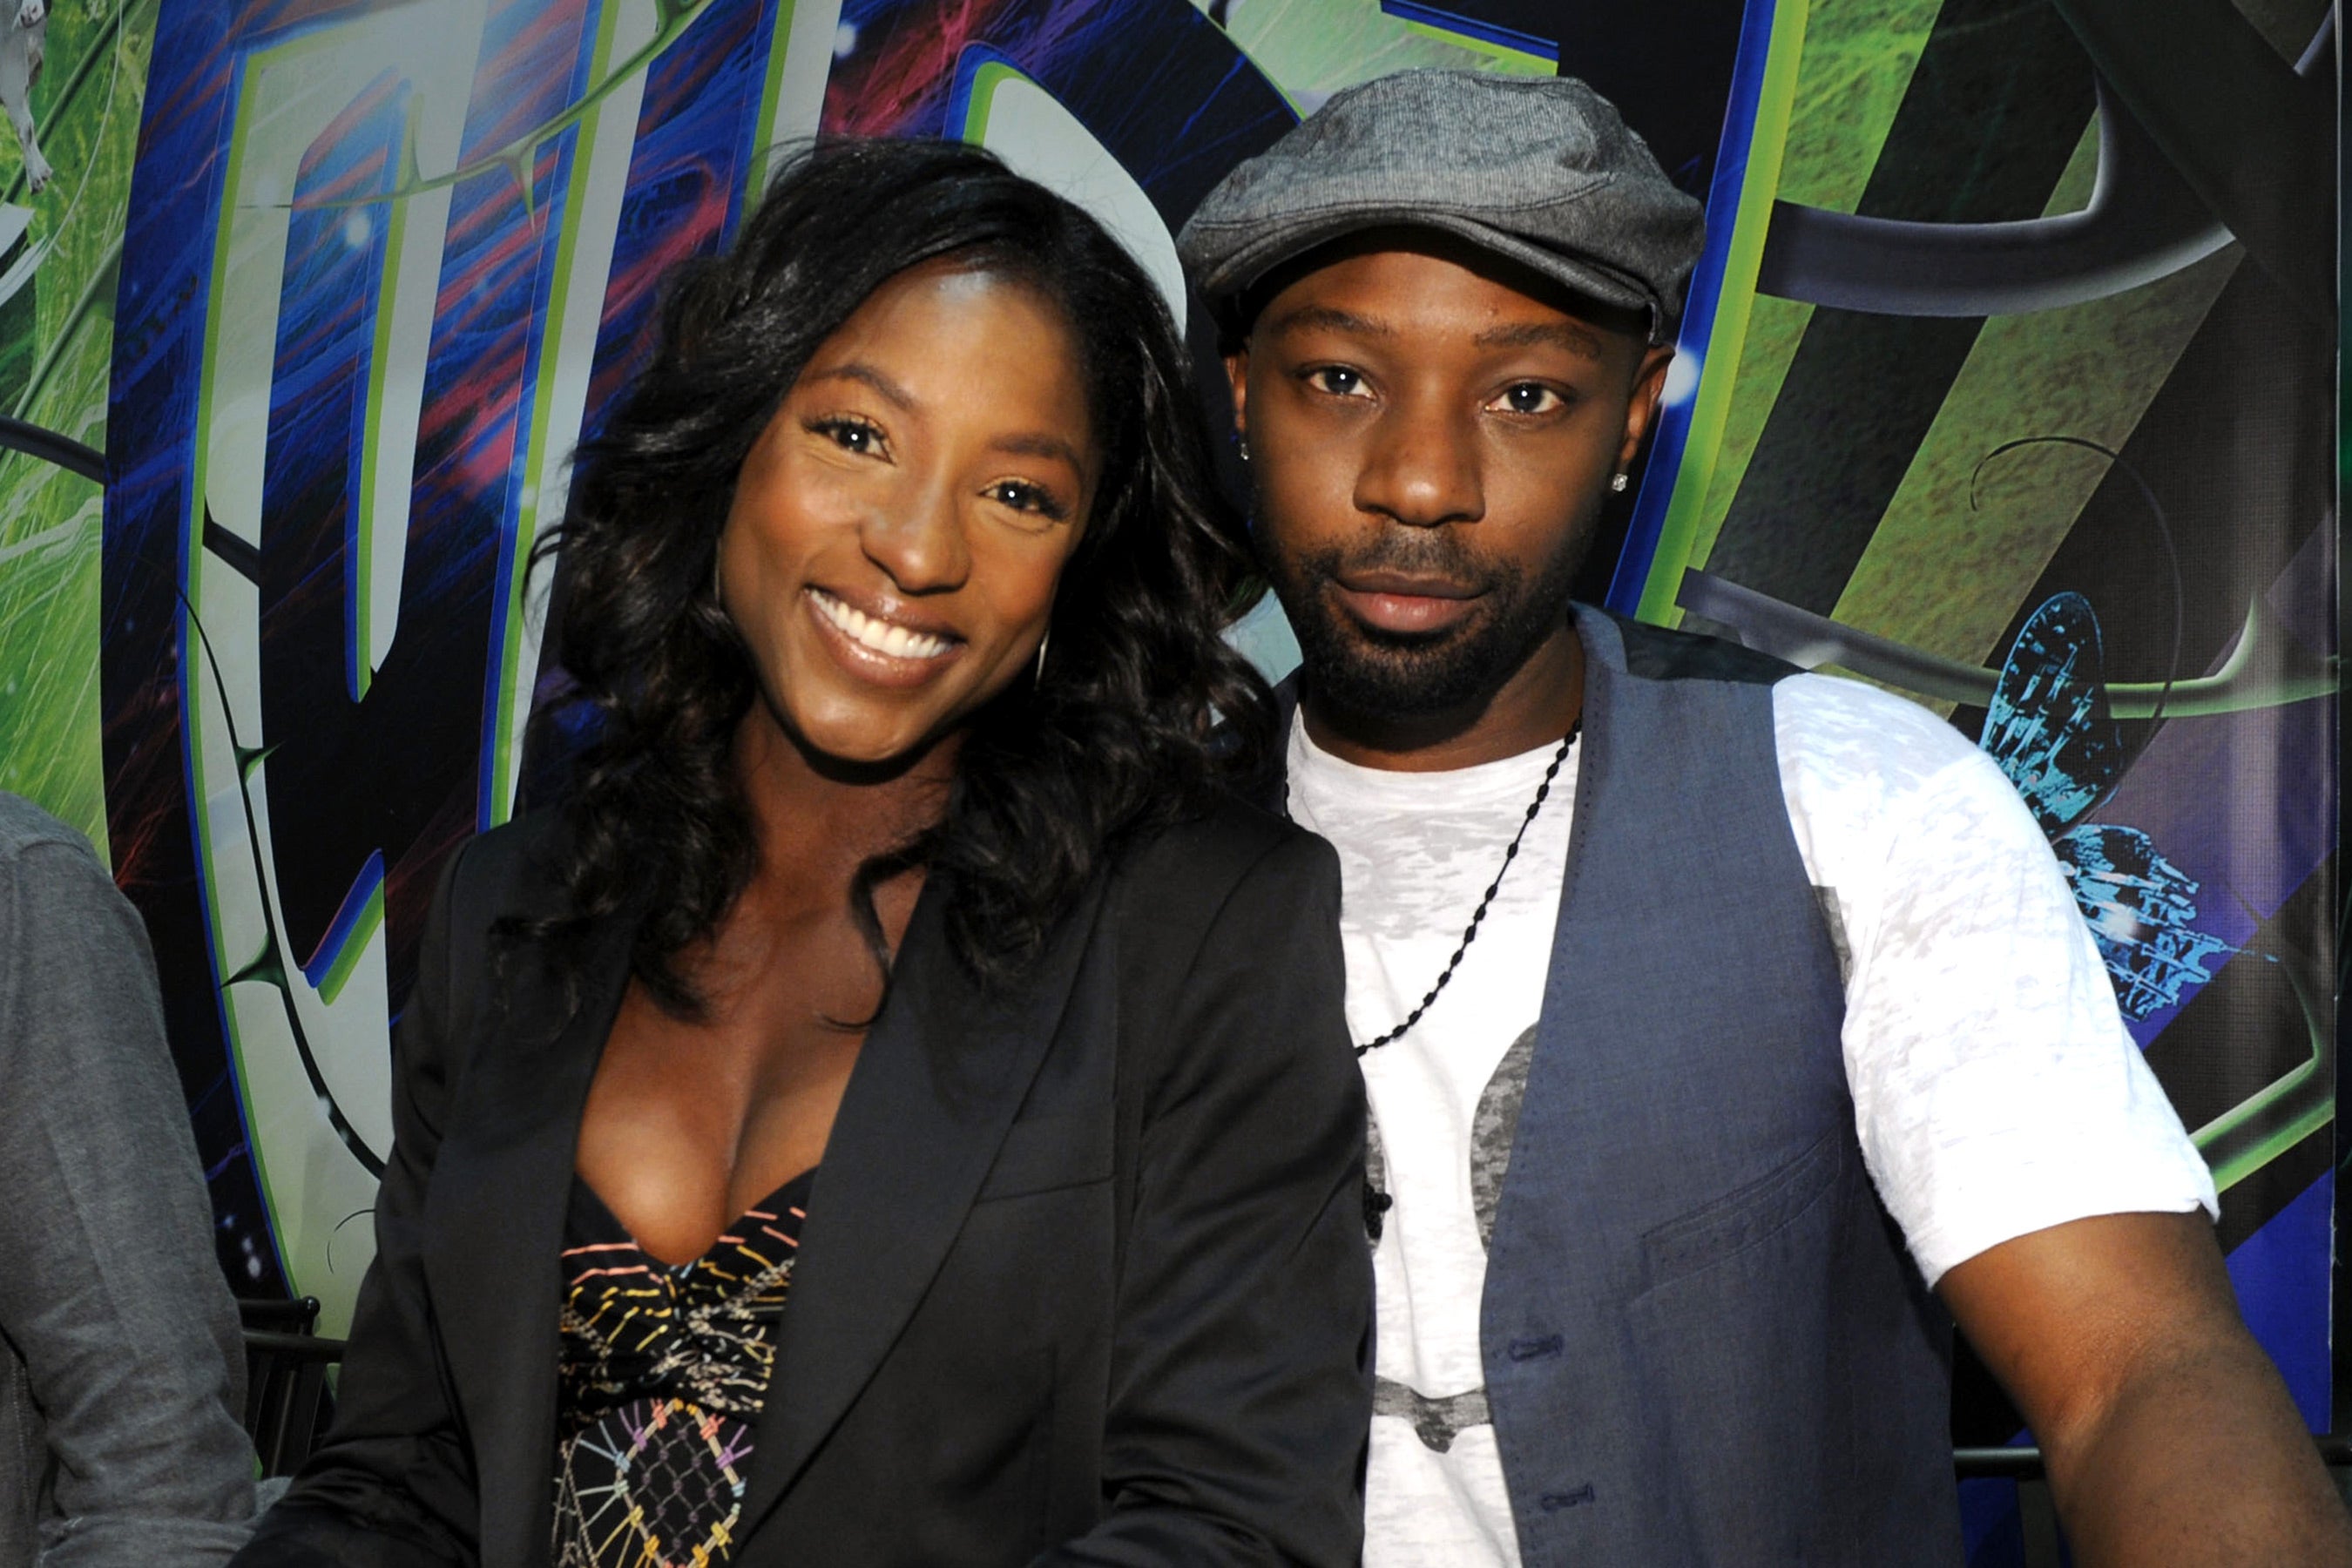 ‘True Blood’: Rutina Wesley Pens Touching Tribute To Friend And Co-star Nelsan Ellis